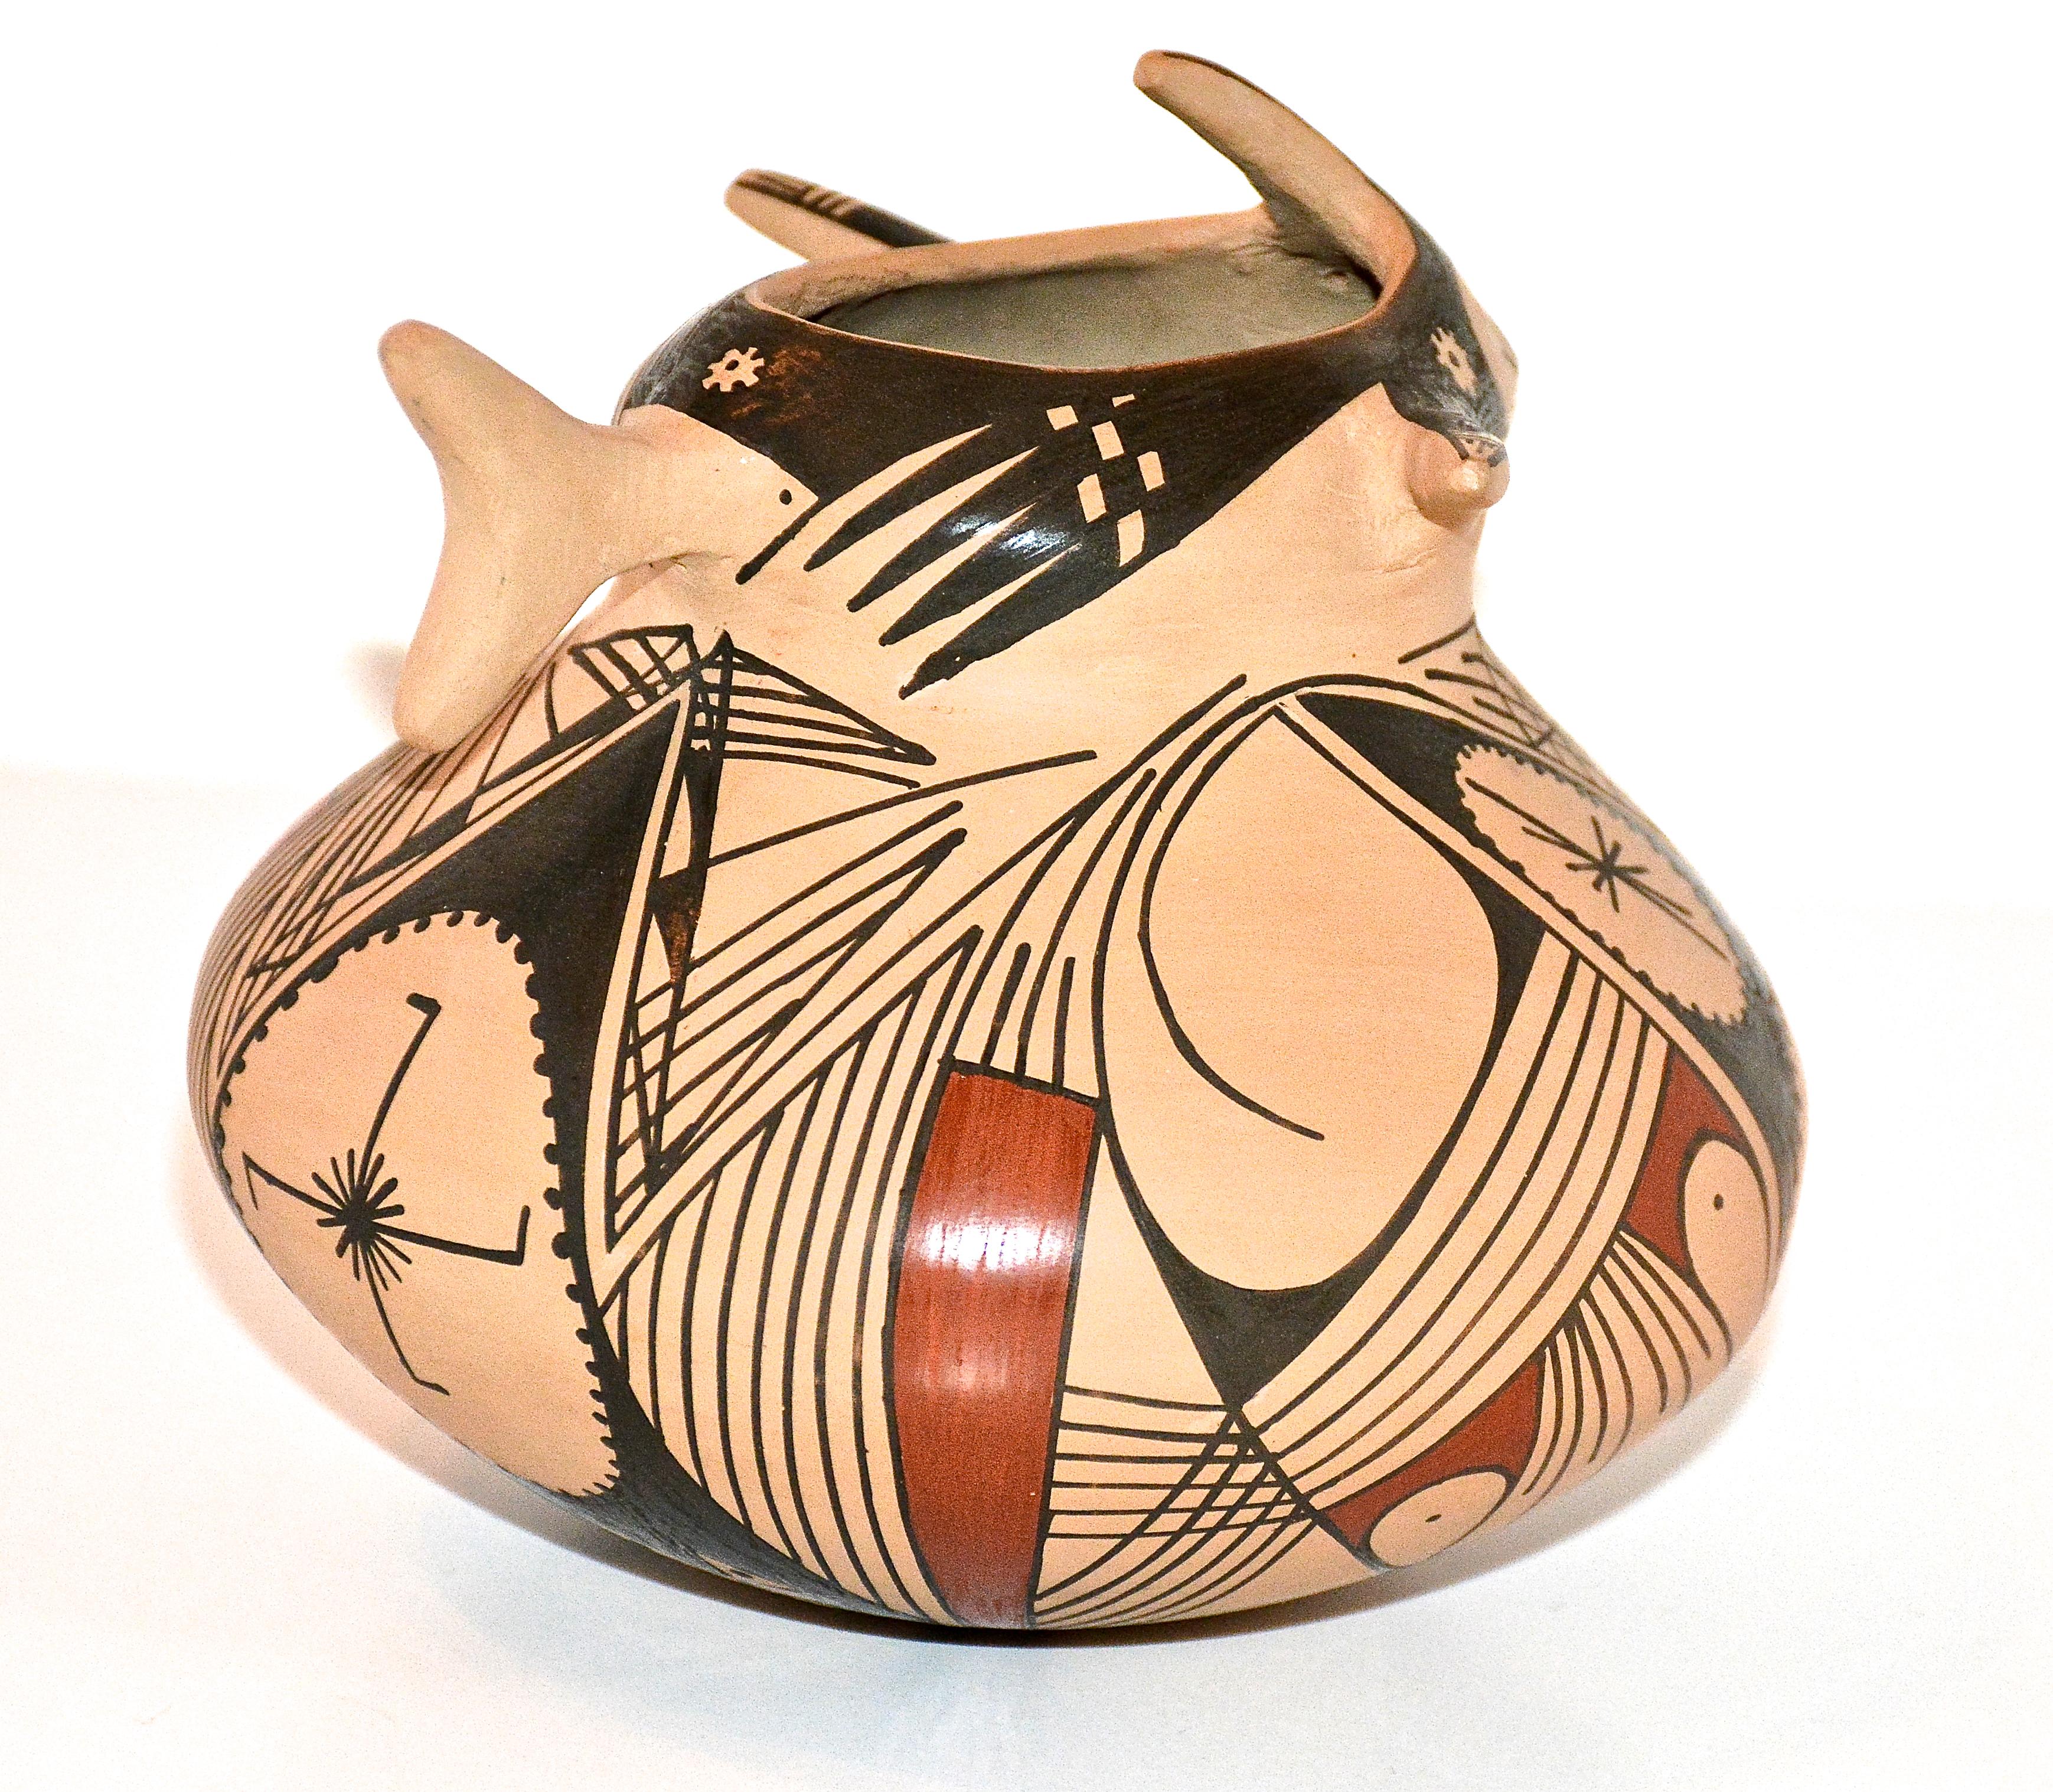 Hand-Crafted Mata Ortiz Polychrome Effigy Pot by Mauro Quezada, 1989 For Sale